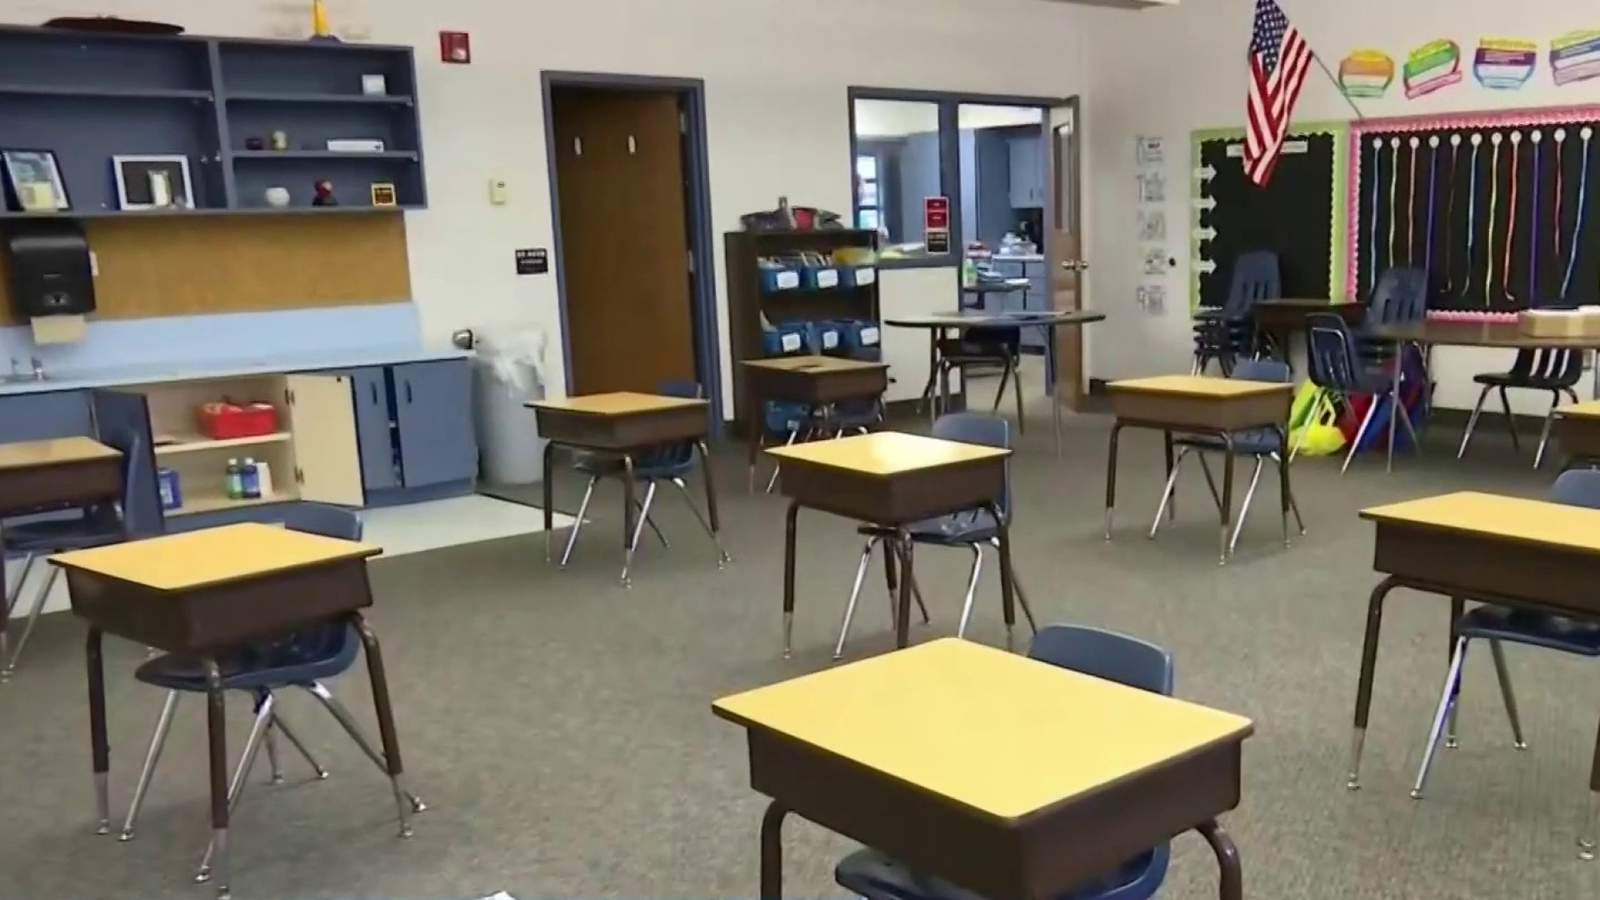 Brevard teachers union not confident schools are ready to reopen safely